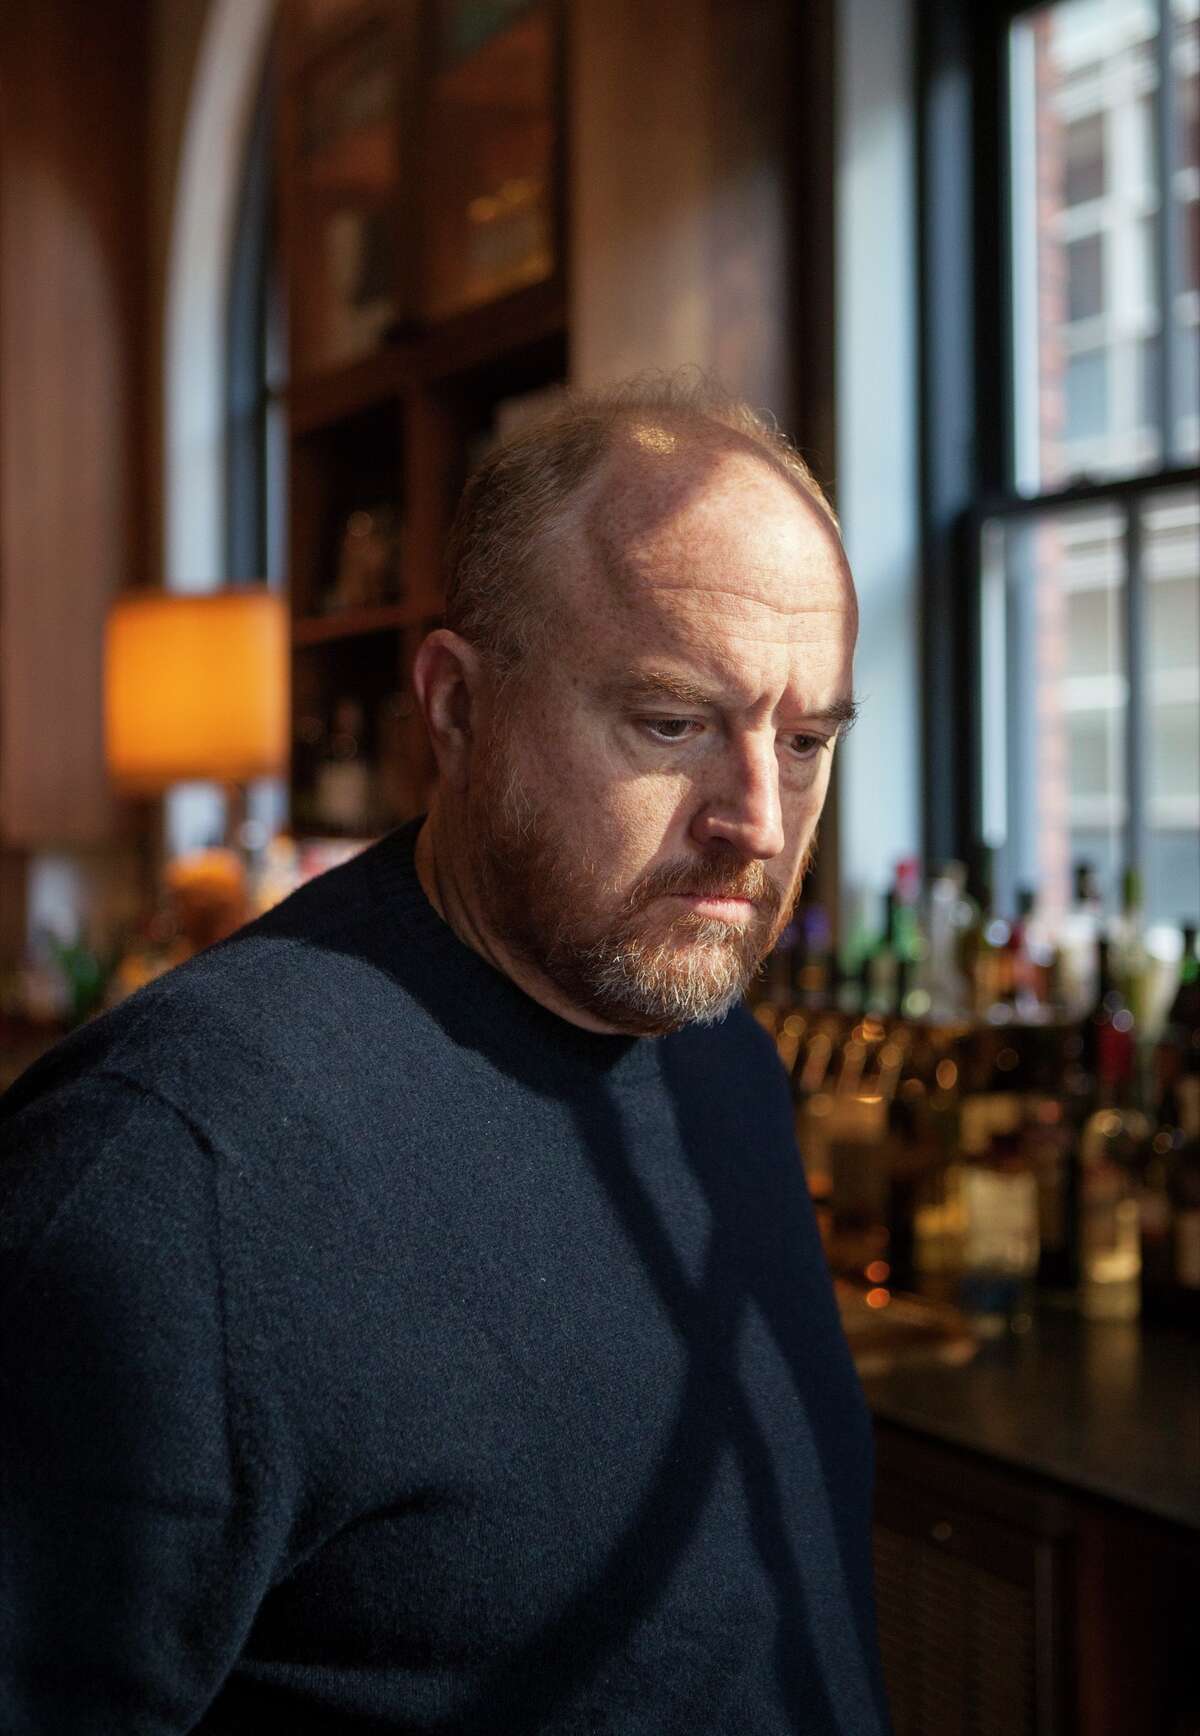 Louis C.K. crossed a line into sexual misconduct, 5 women say